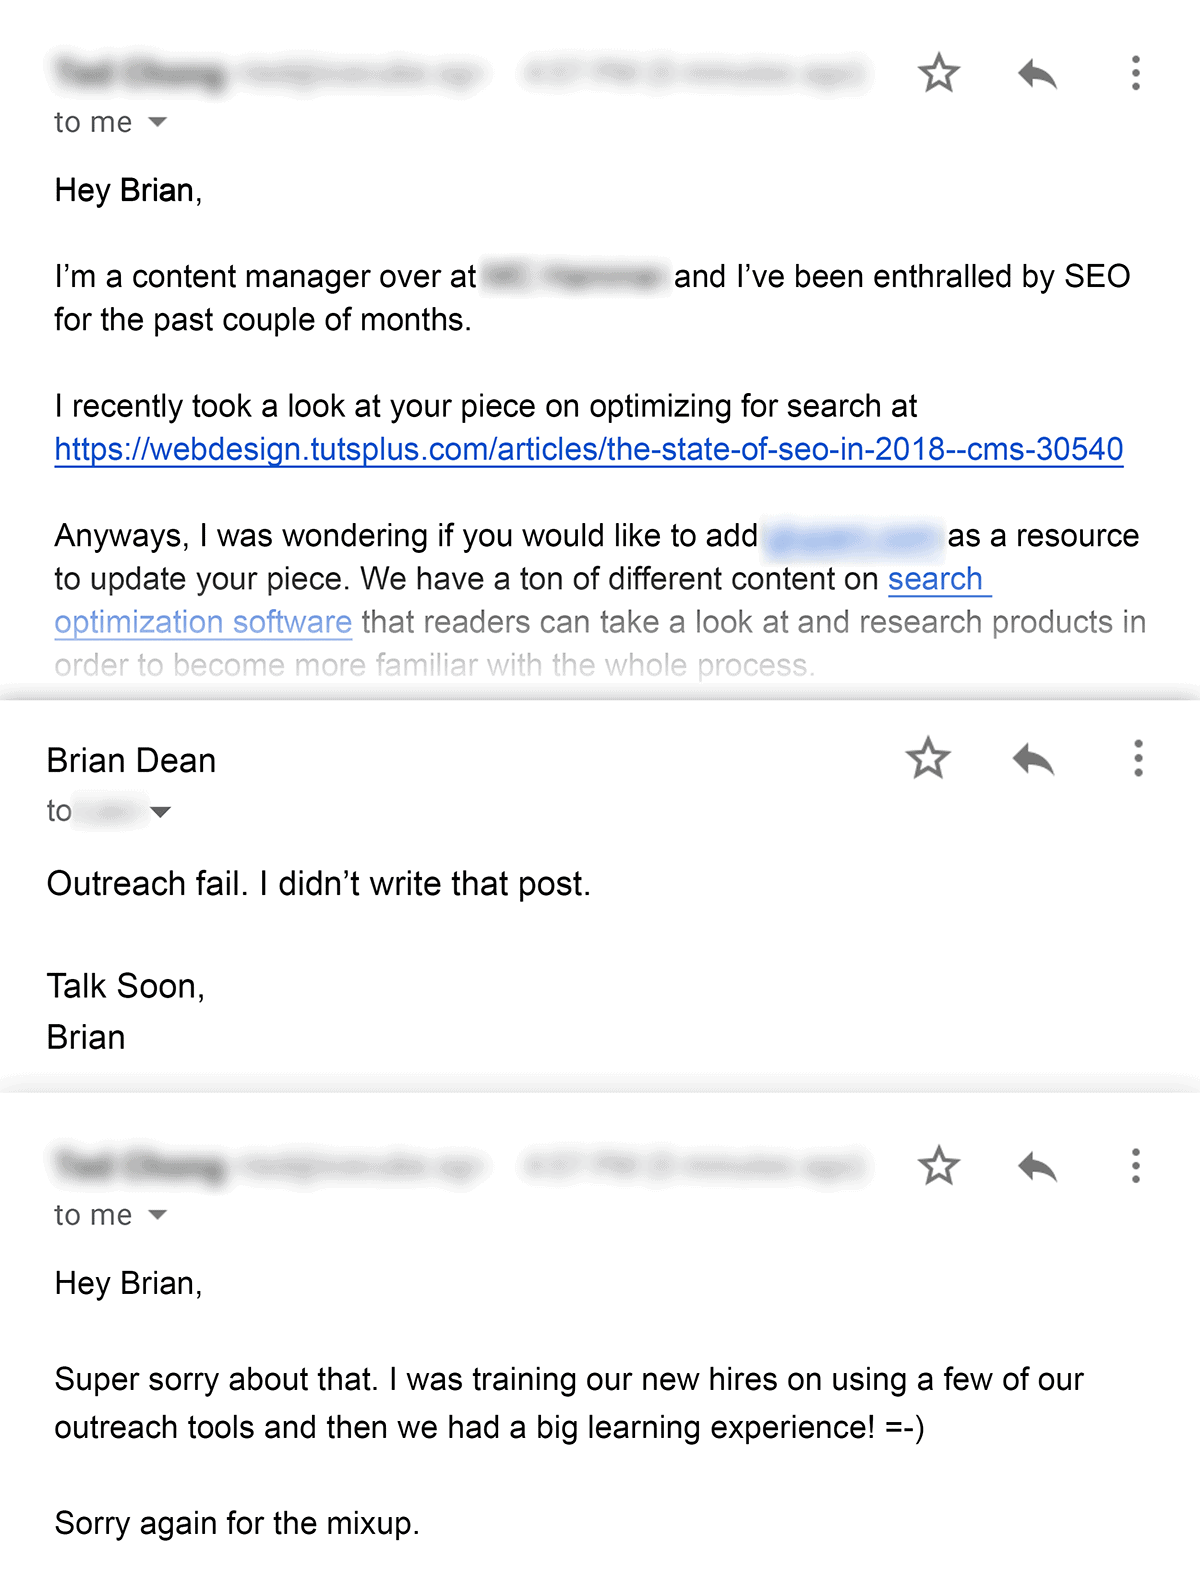 Newbie mistake in outreach email